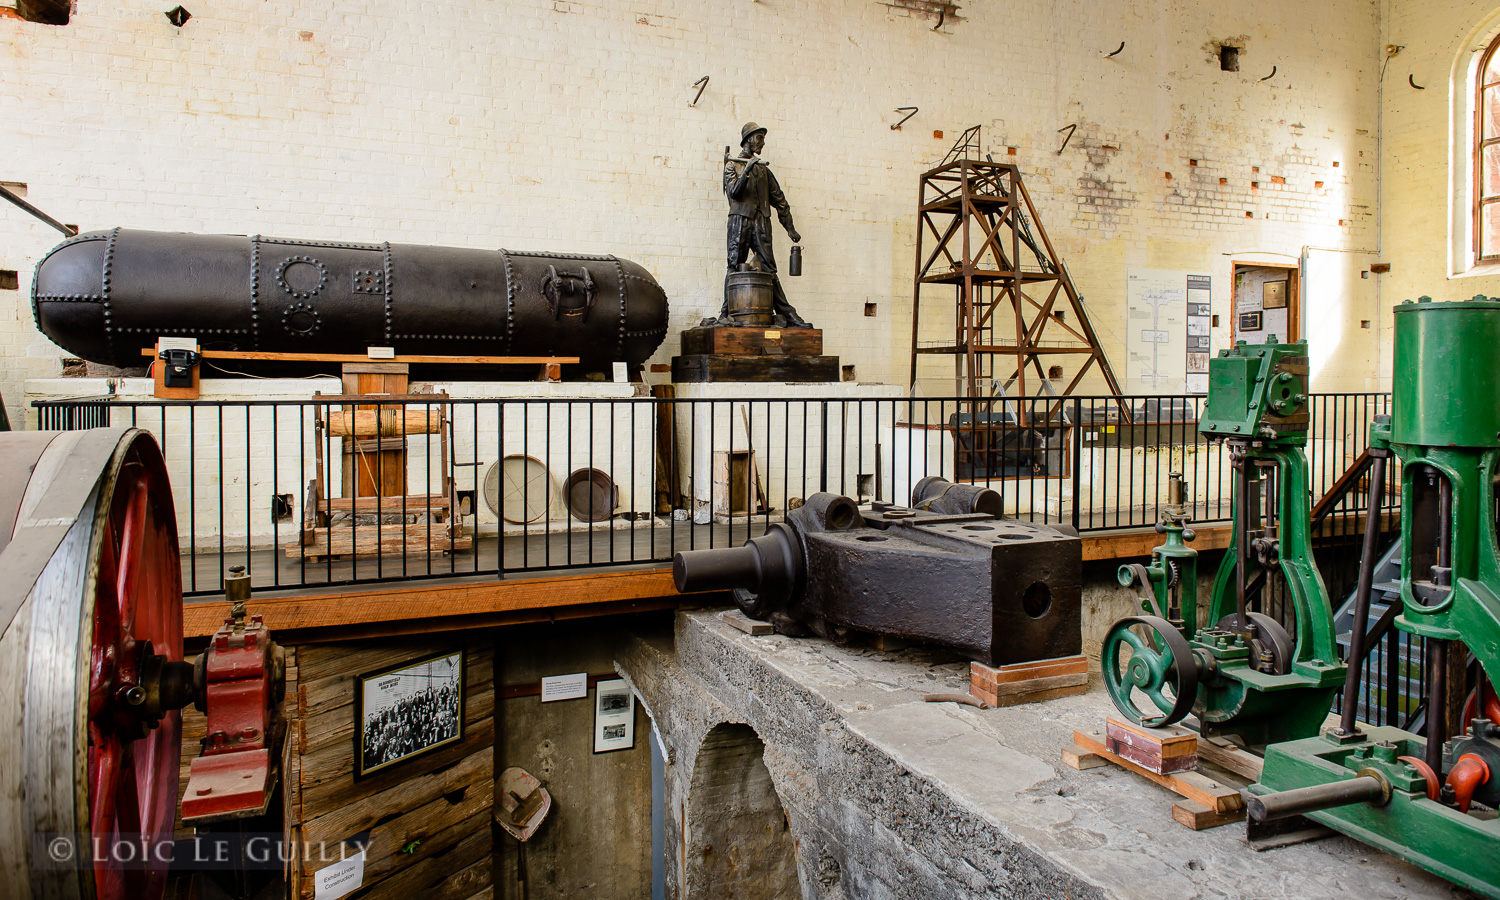 photograph of Mining artefacts